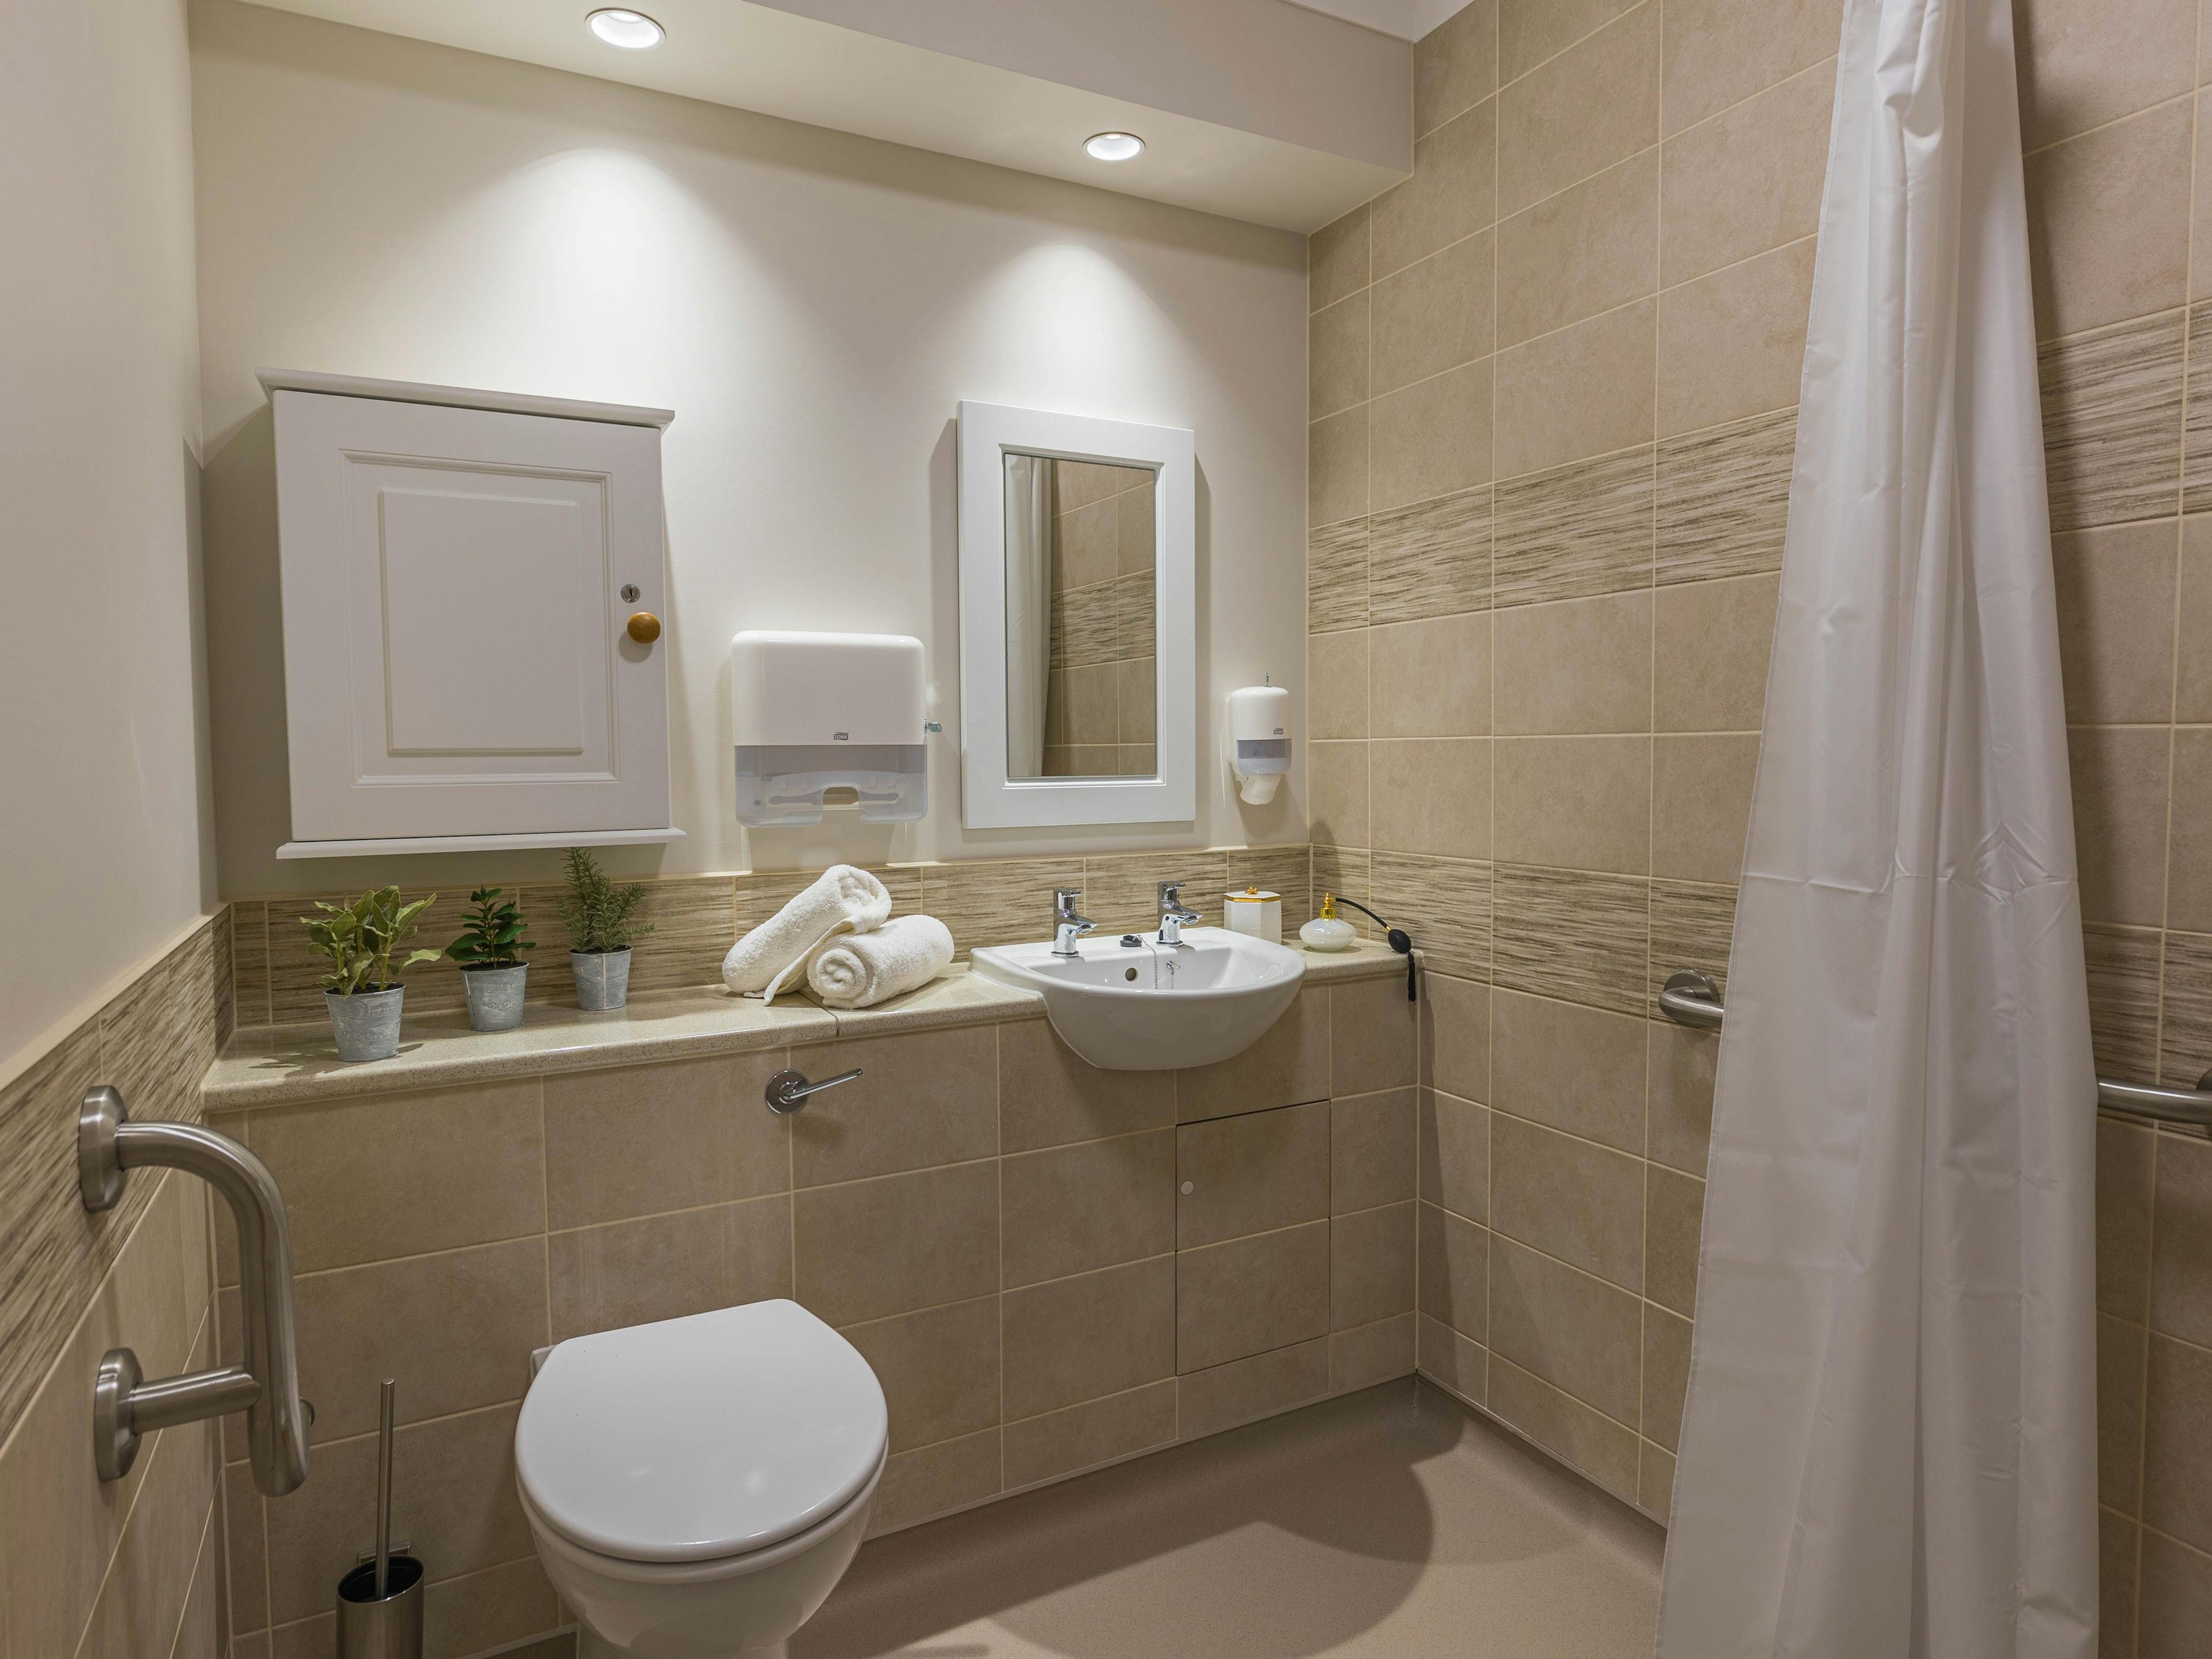 Bathroom at Sutton Valence Care Home in Maidstone, Kent